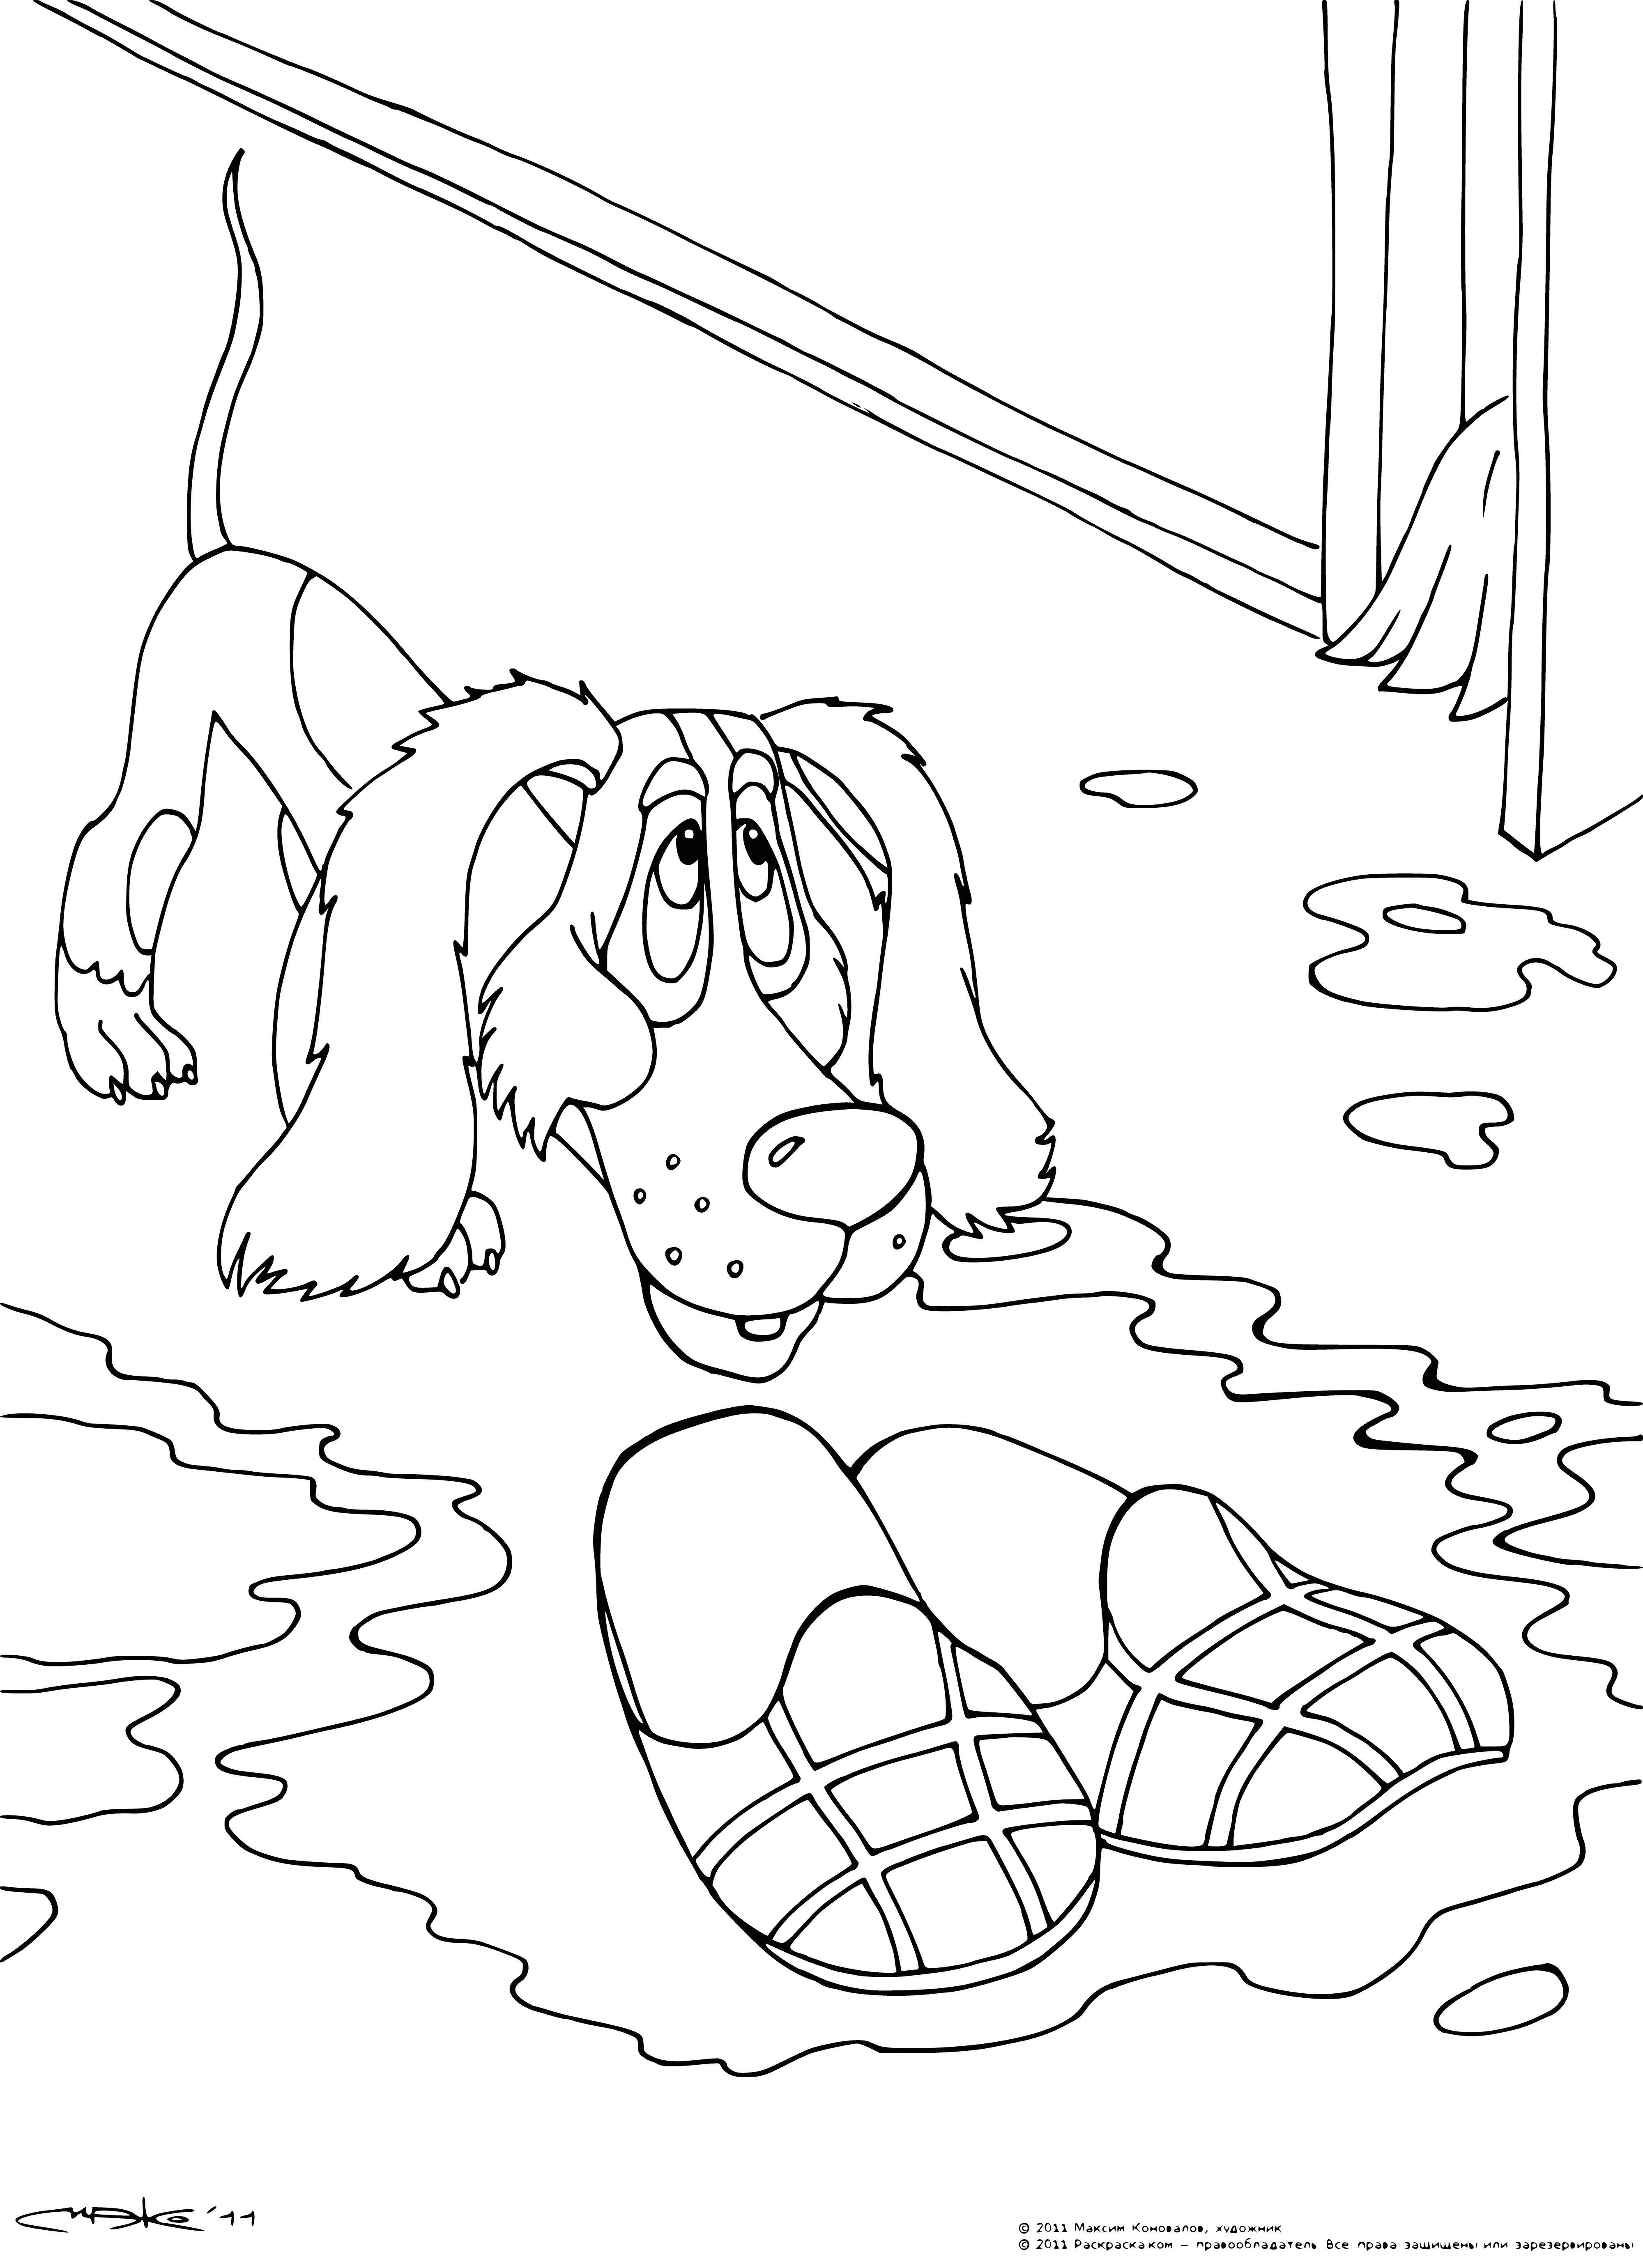 coloring page: Dog visits home and brings slippers, enjoying itself as it strolls around.